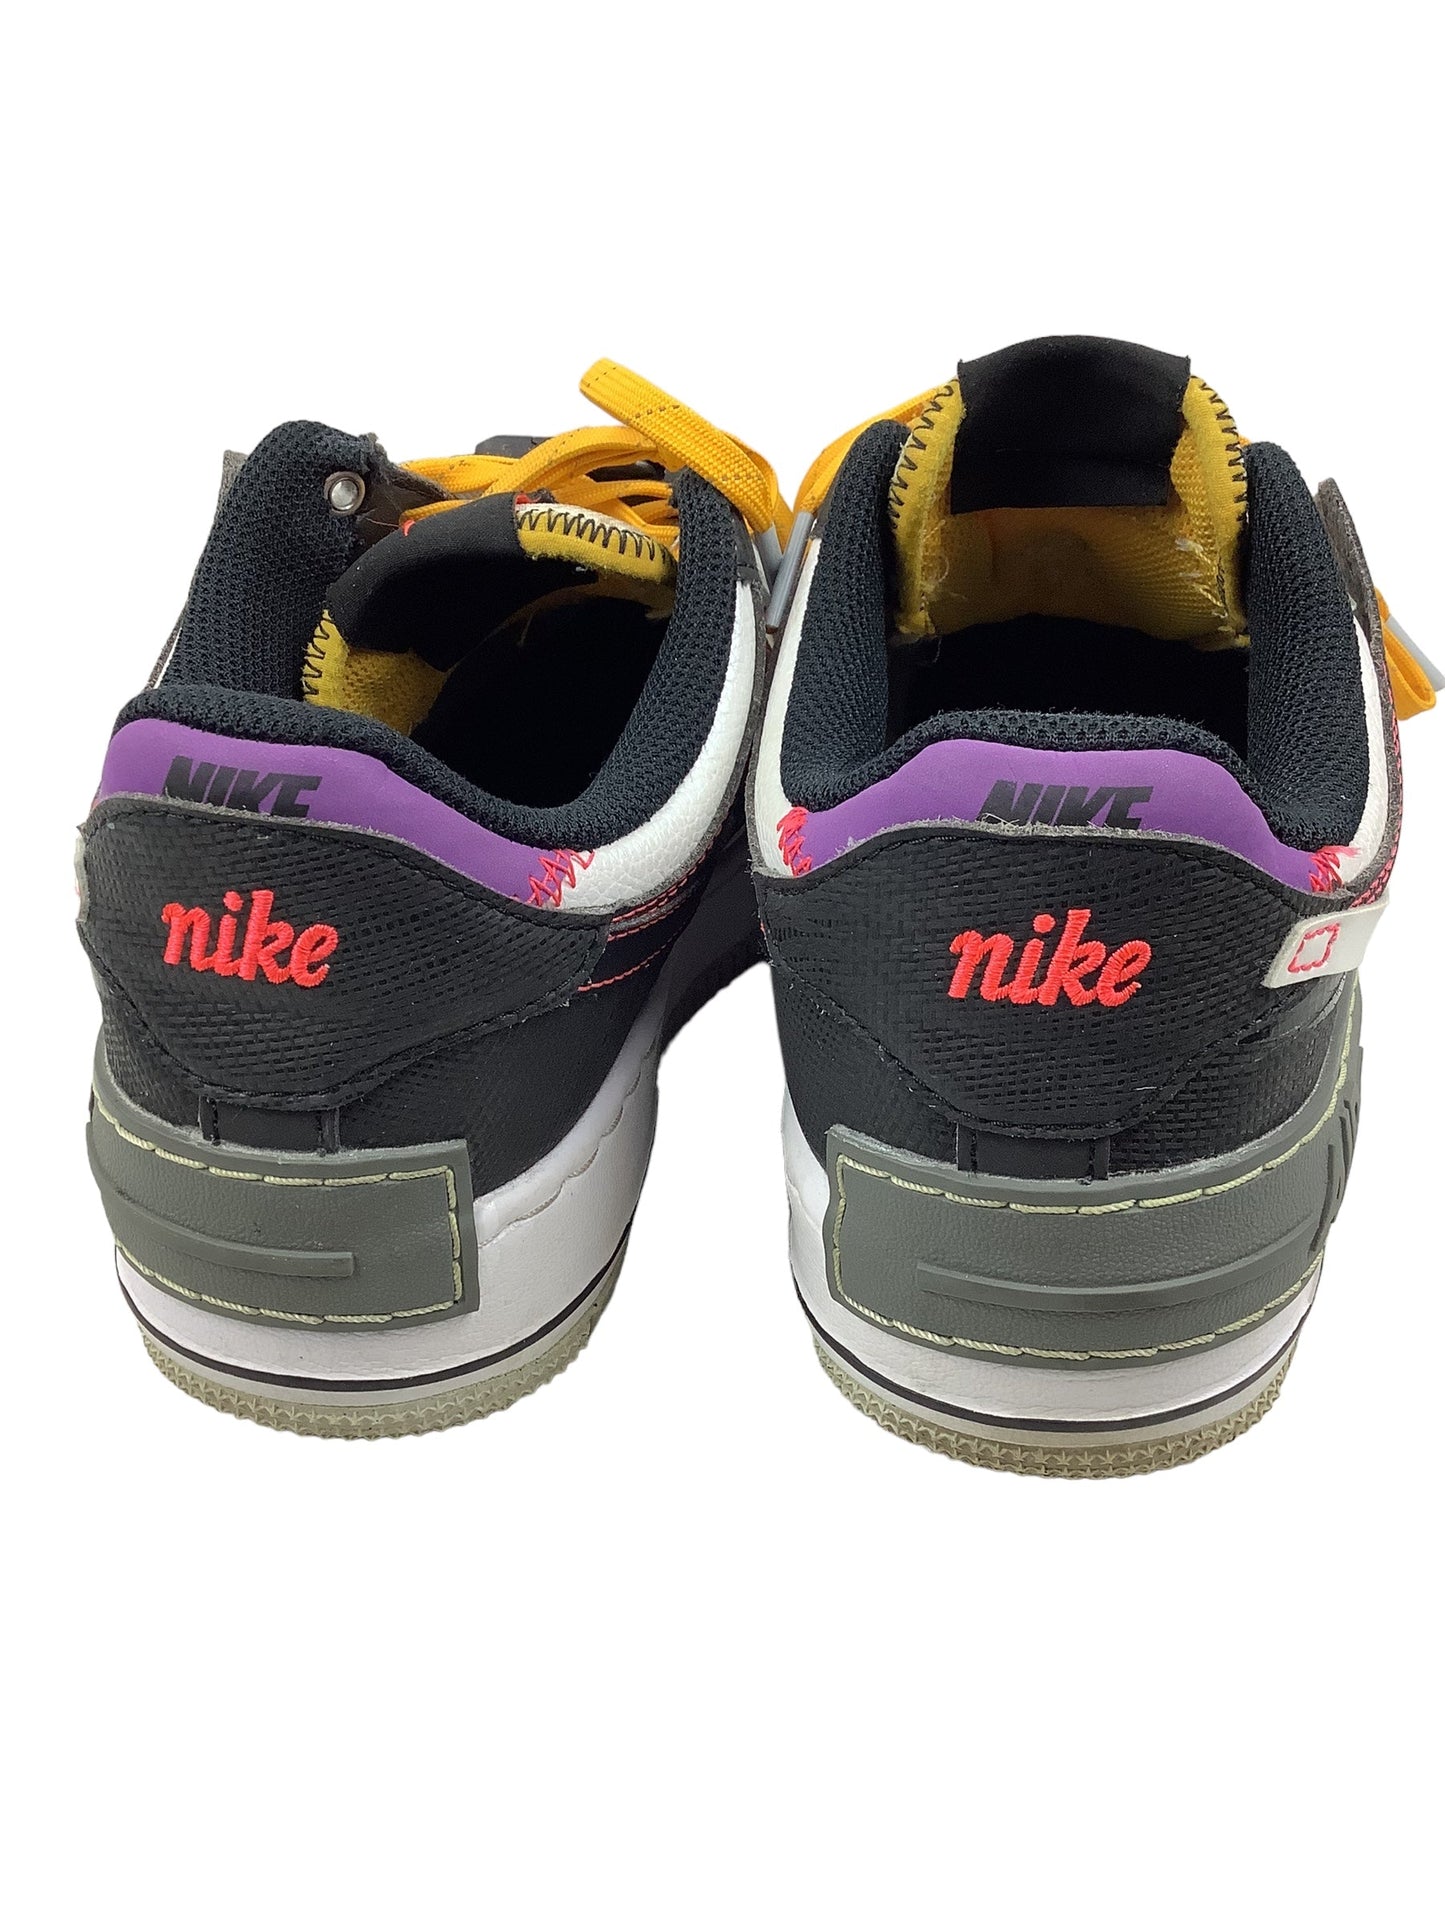 Multi-colored Shoes Sneakers Nike, Size 7